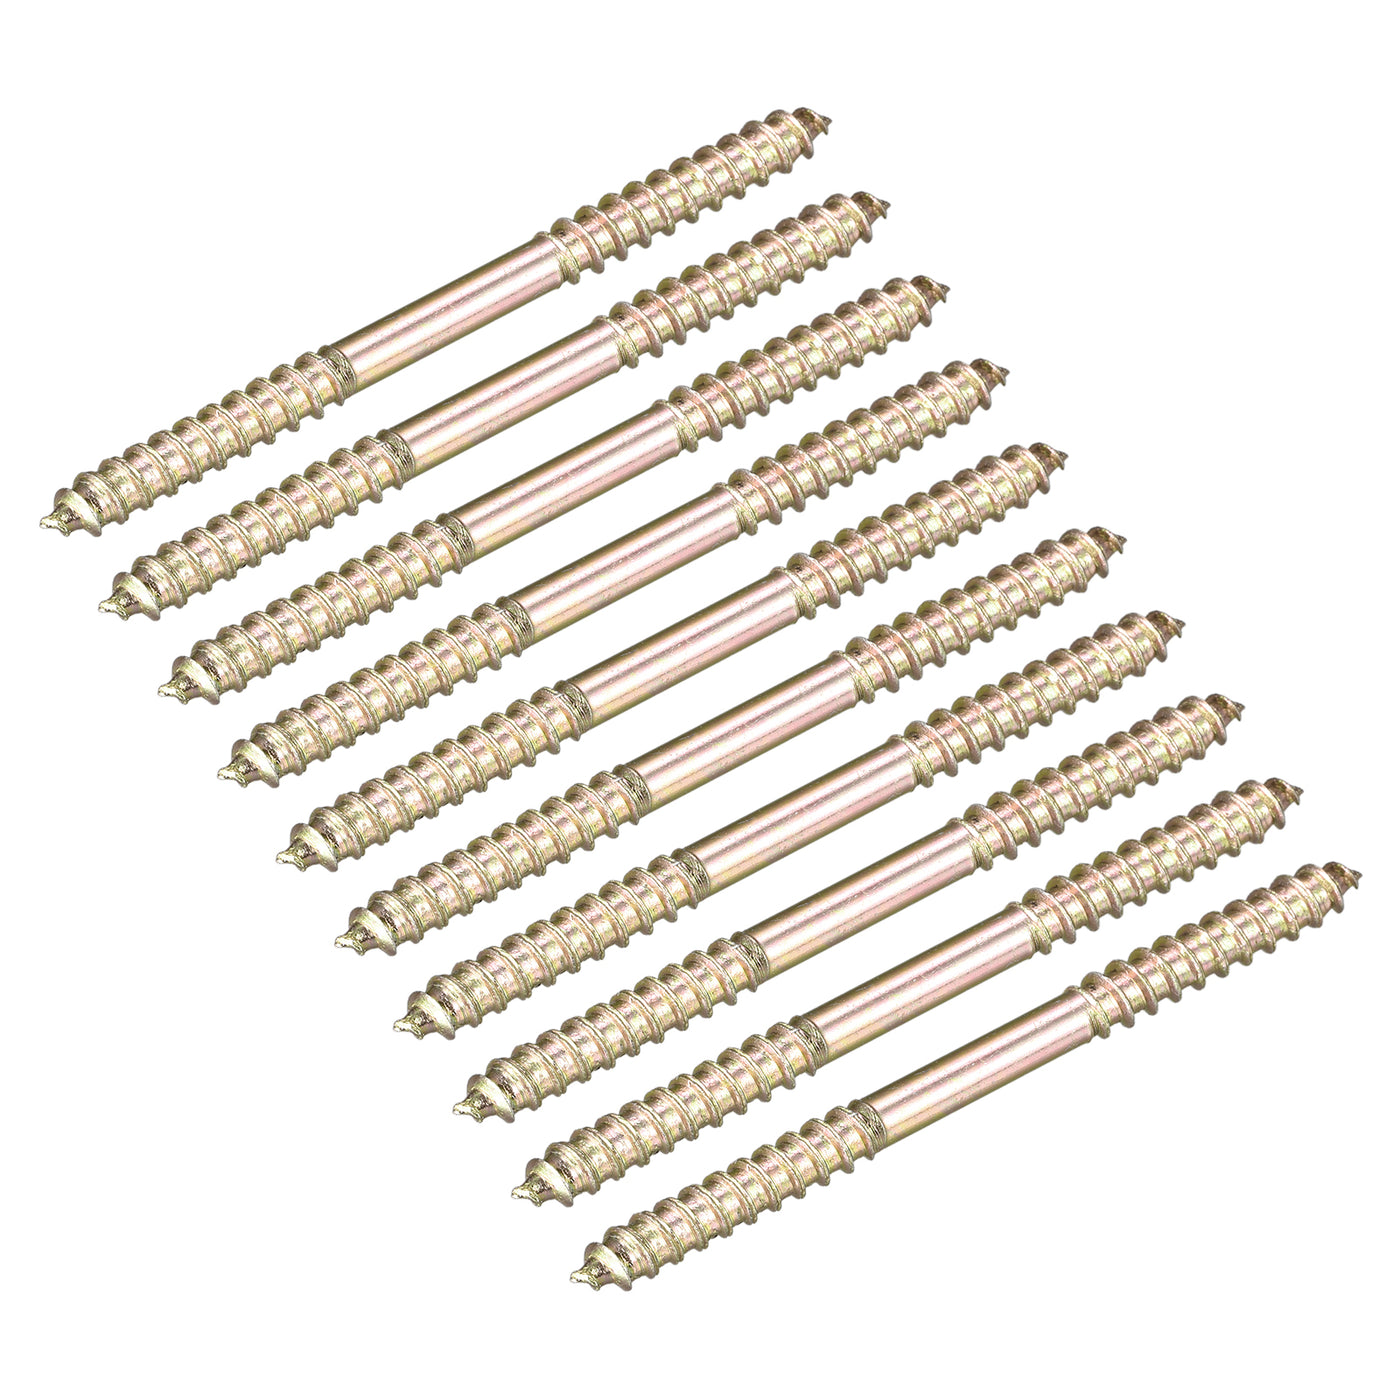 Uxcell Uxcell 5x13mm Hanger Bolts, 20pcs Double Ended Self-Tapping Thread Dowel Screws